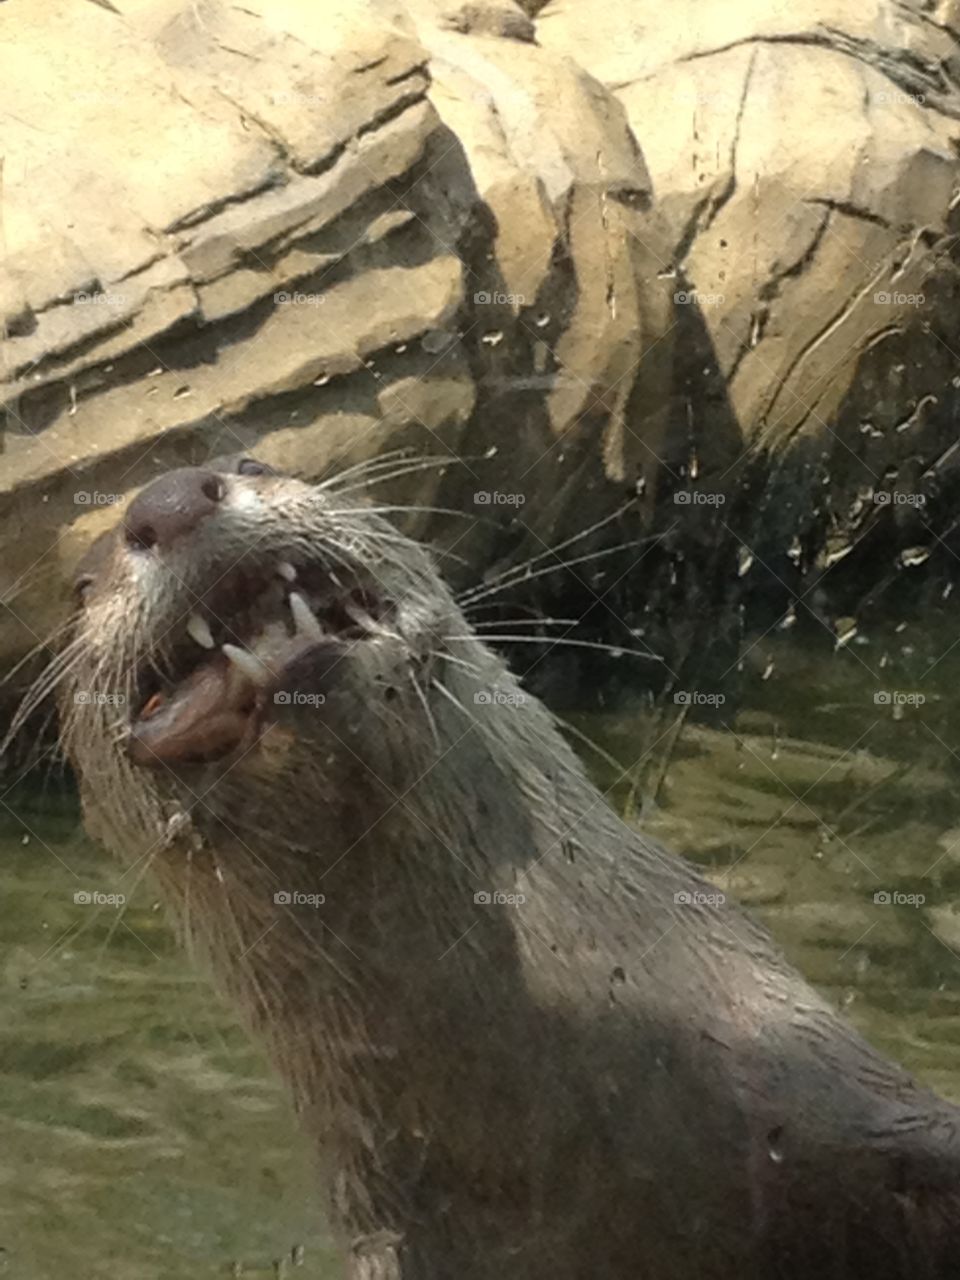 Another one of the otters eating its lunch